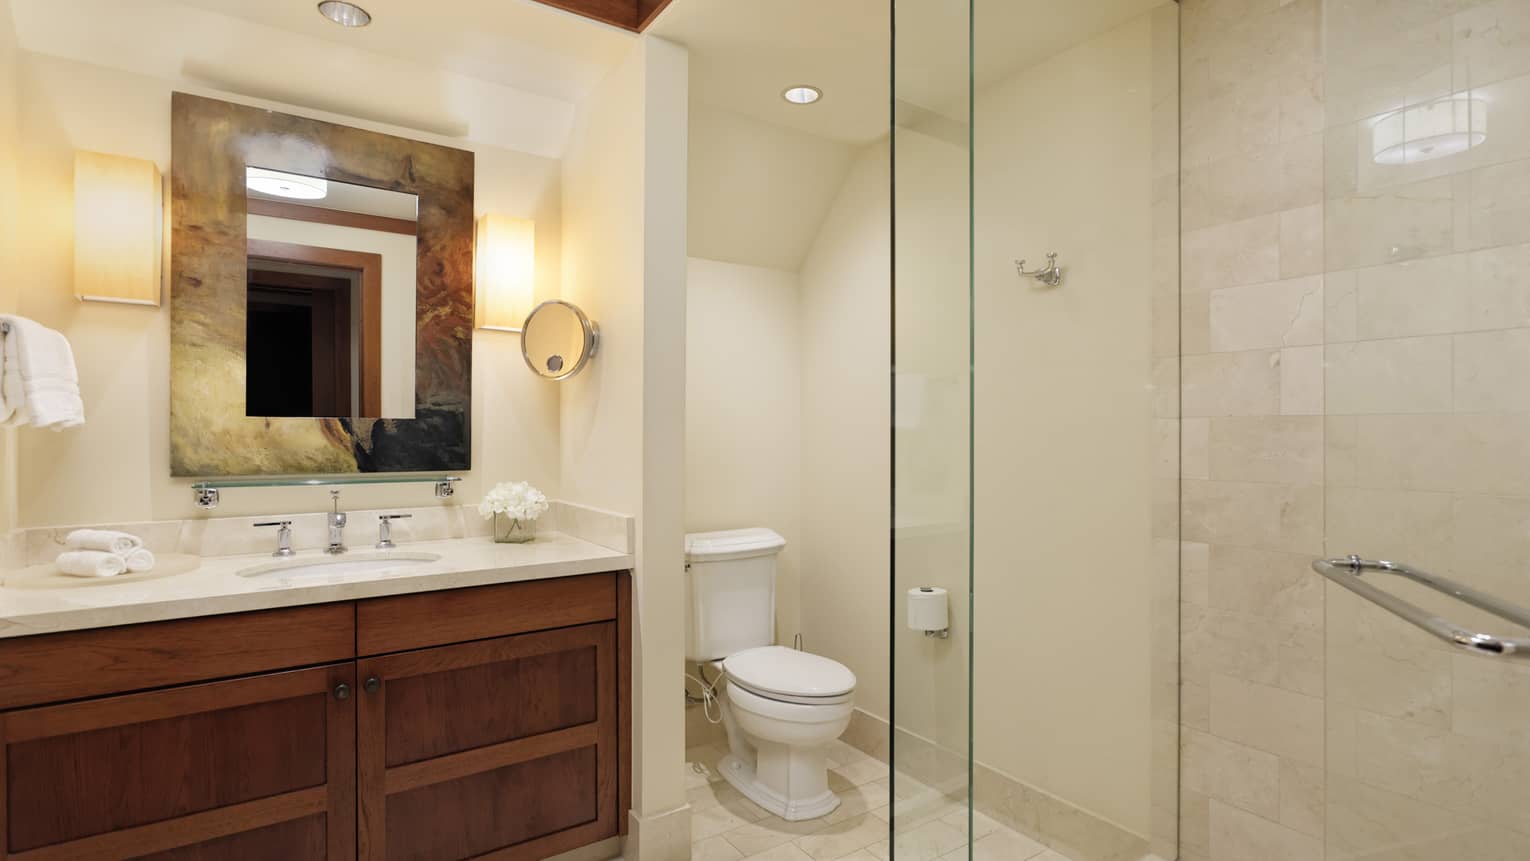 Bathroom with glass-enclosed shower, wooden vanity, toilet